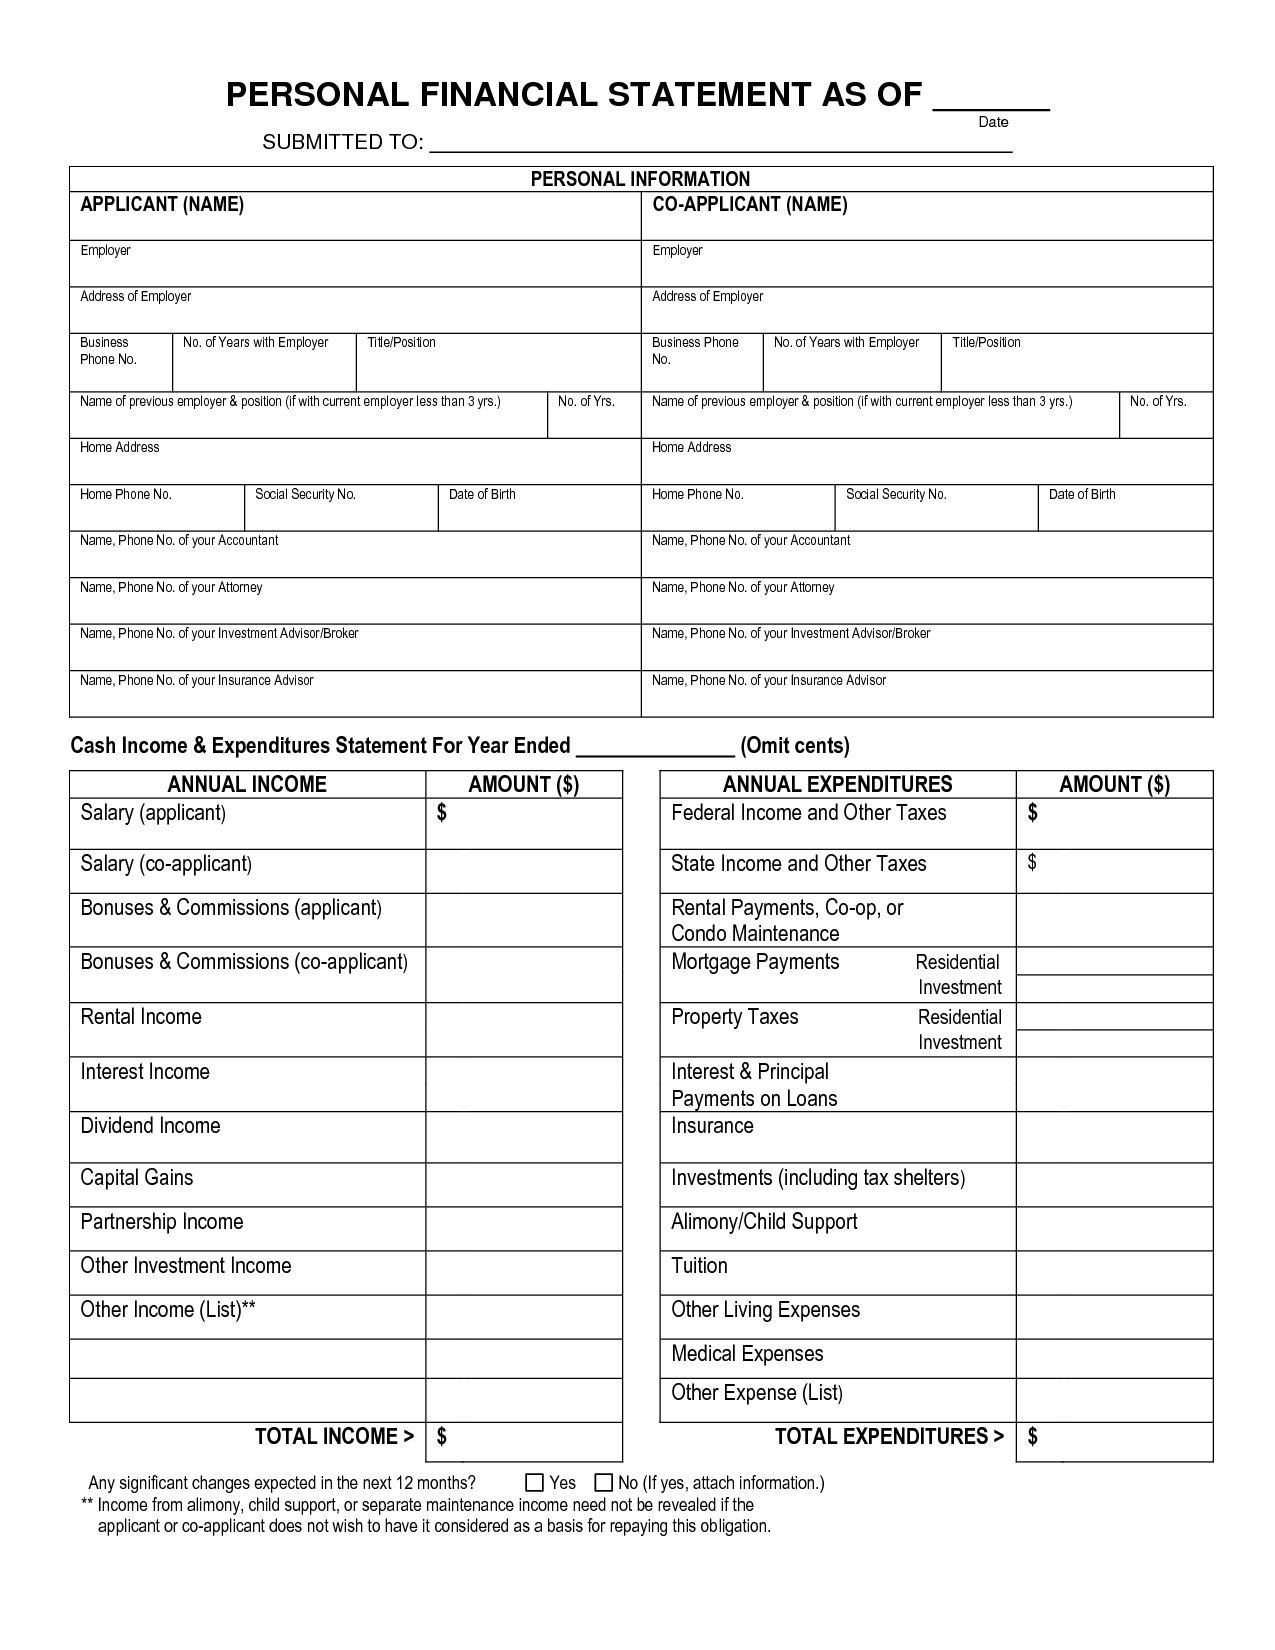 Free Printable Personal Financial Statement | Blank Personal - Find Free Printable Forms Online